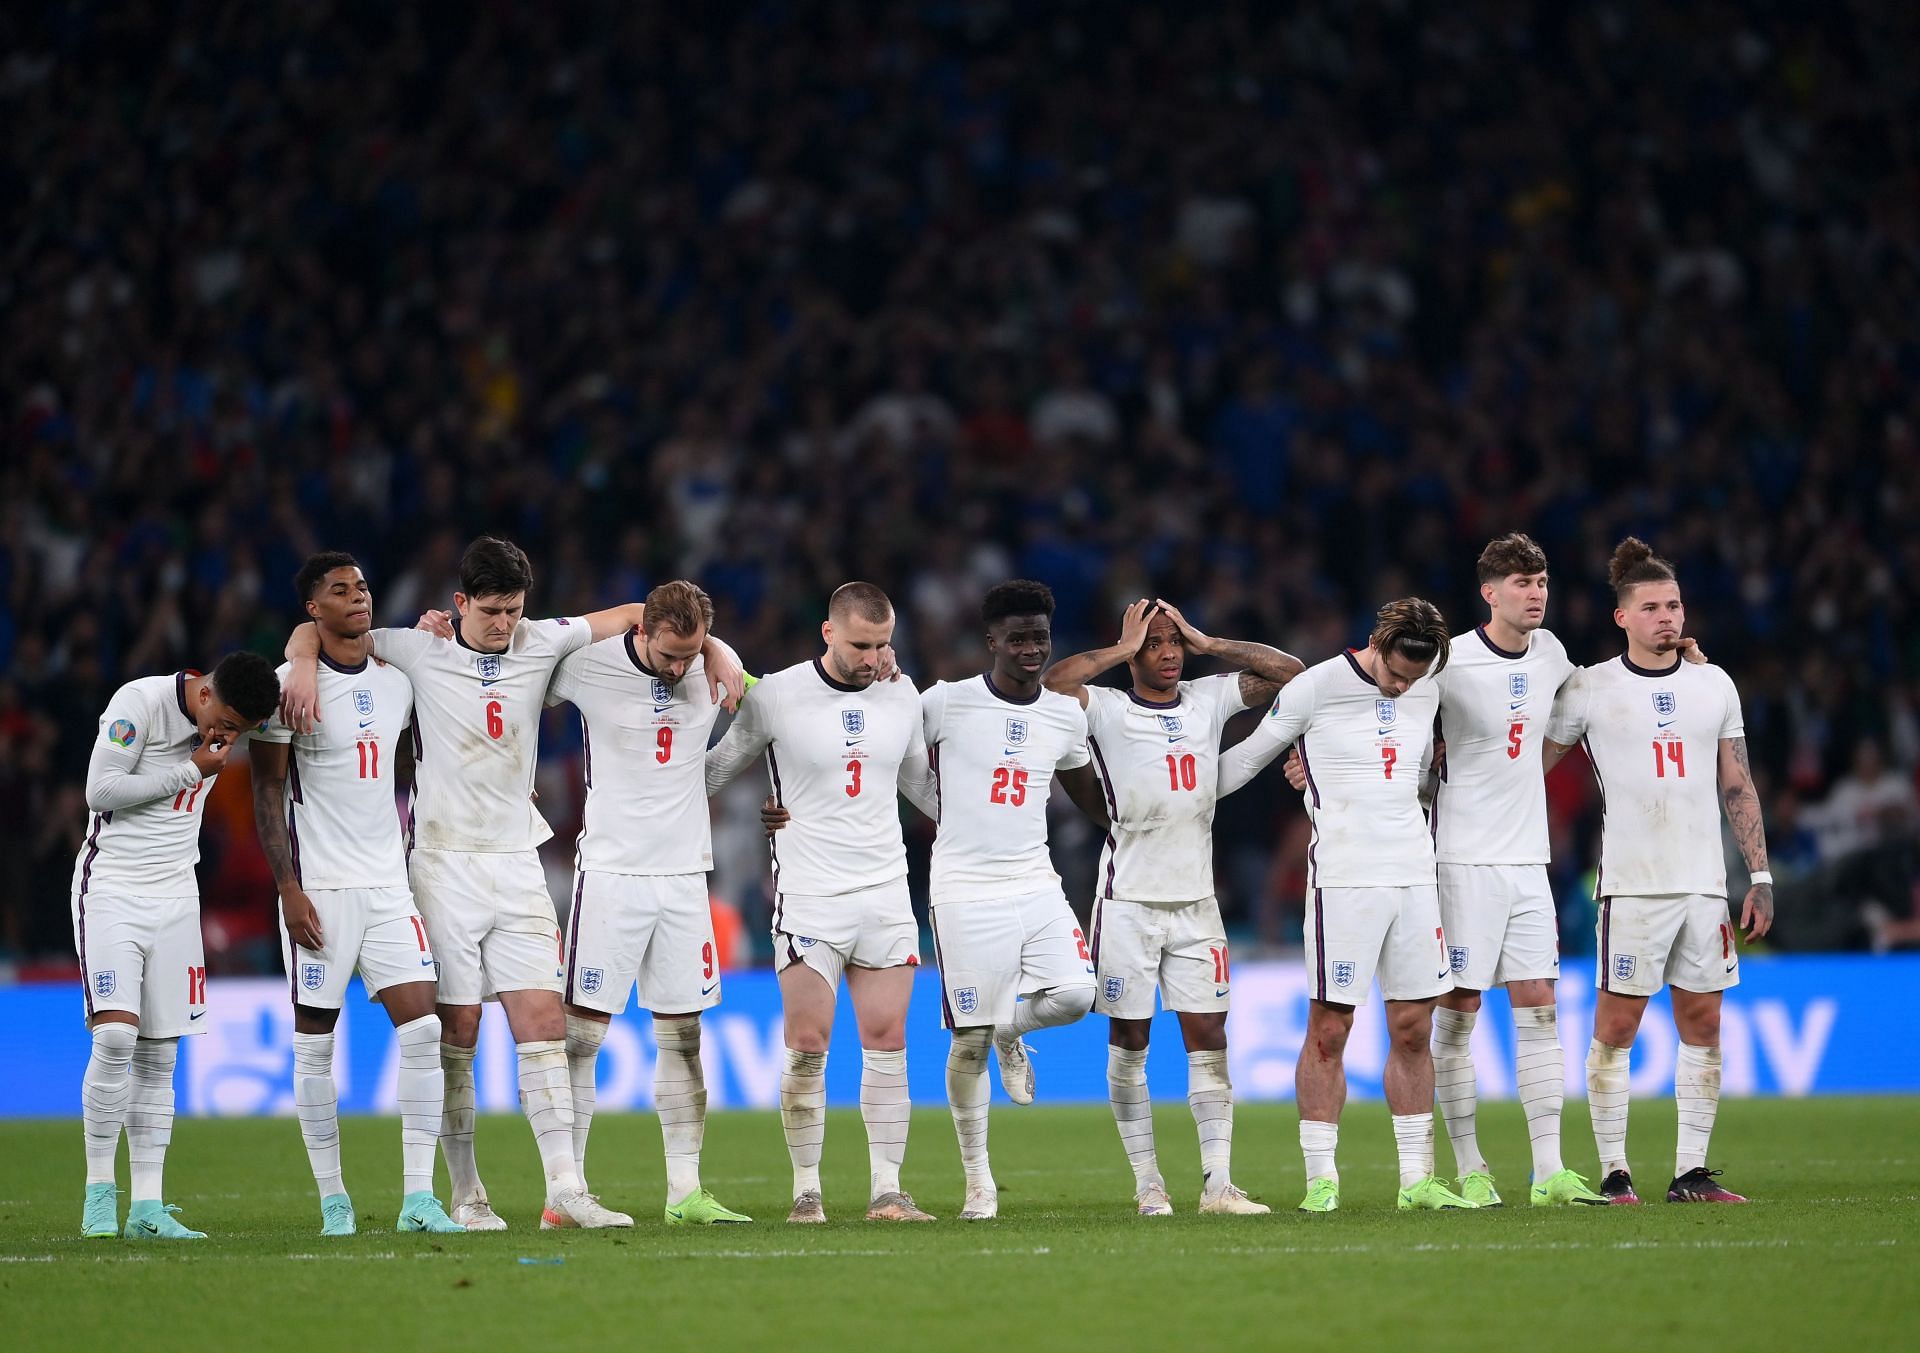 England&#039;s young Lions lost a heartbreaking penalty shootout in the Euros.